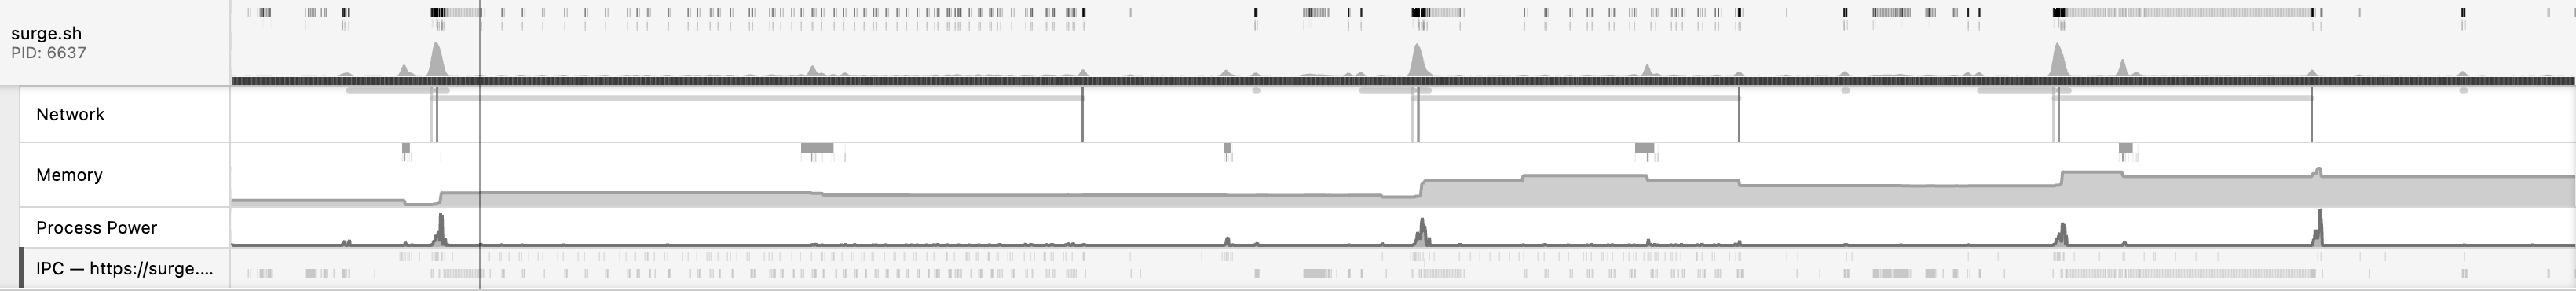 A screenshot of a profile timeline, showing Network, Memory, and Process Power tracks.